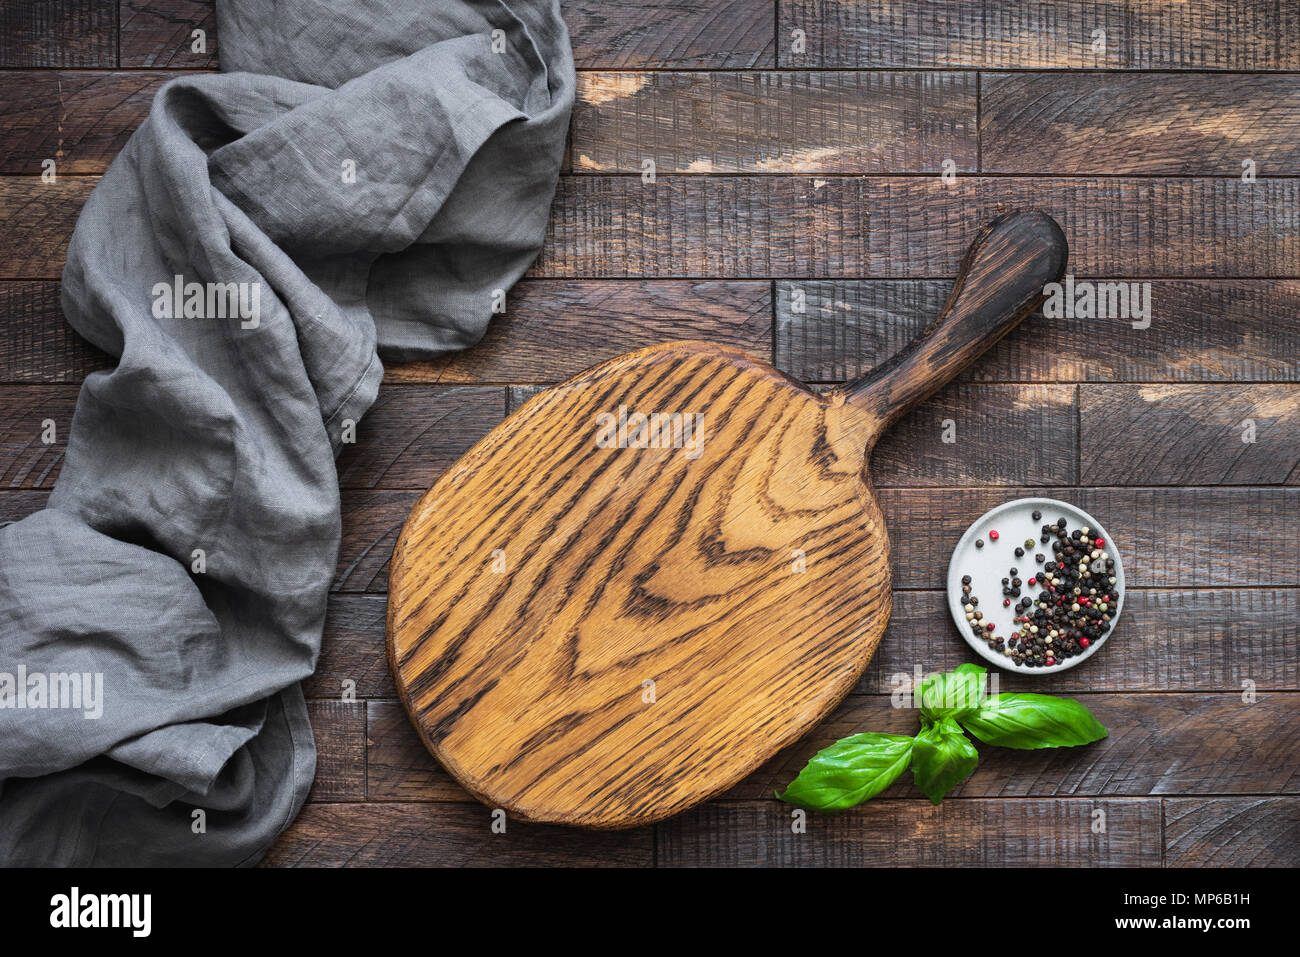 Wooden cutting board, kitchen textile and spices. Food background in rustic style with copy space for text. Great suit for menu, restaurants, blogs an Stock Photo